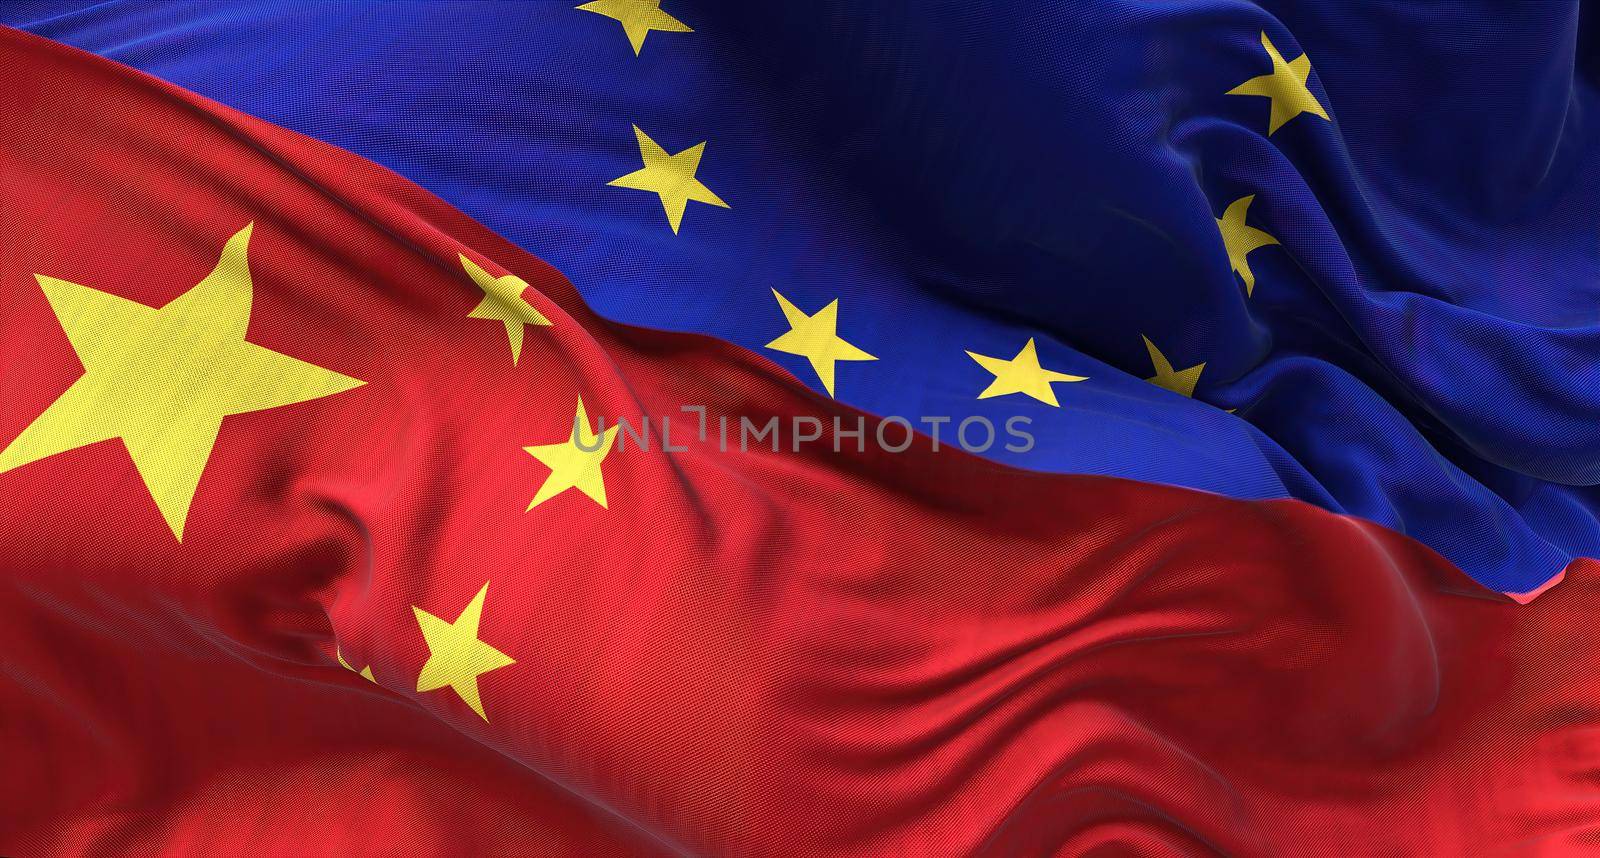 The flags of China and the European Union waving by rarrarorro